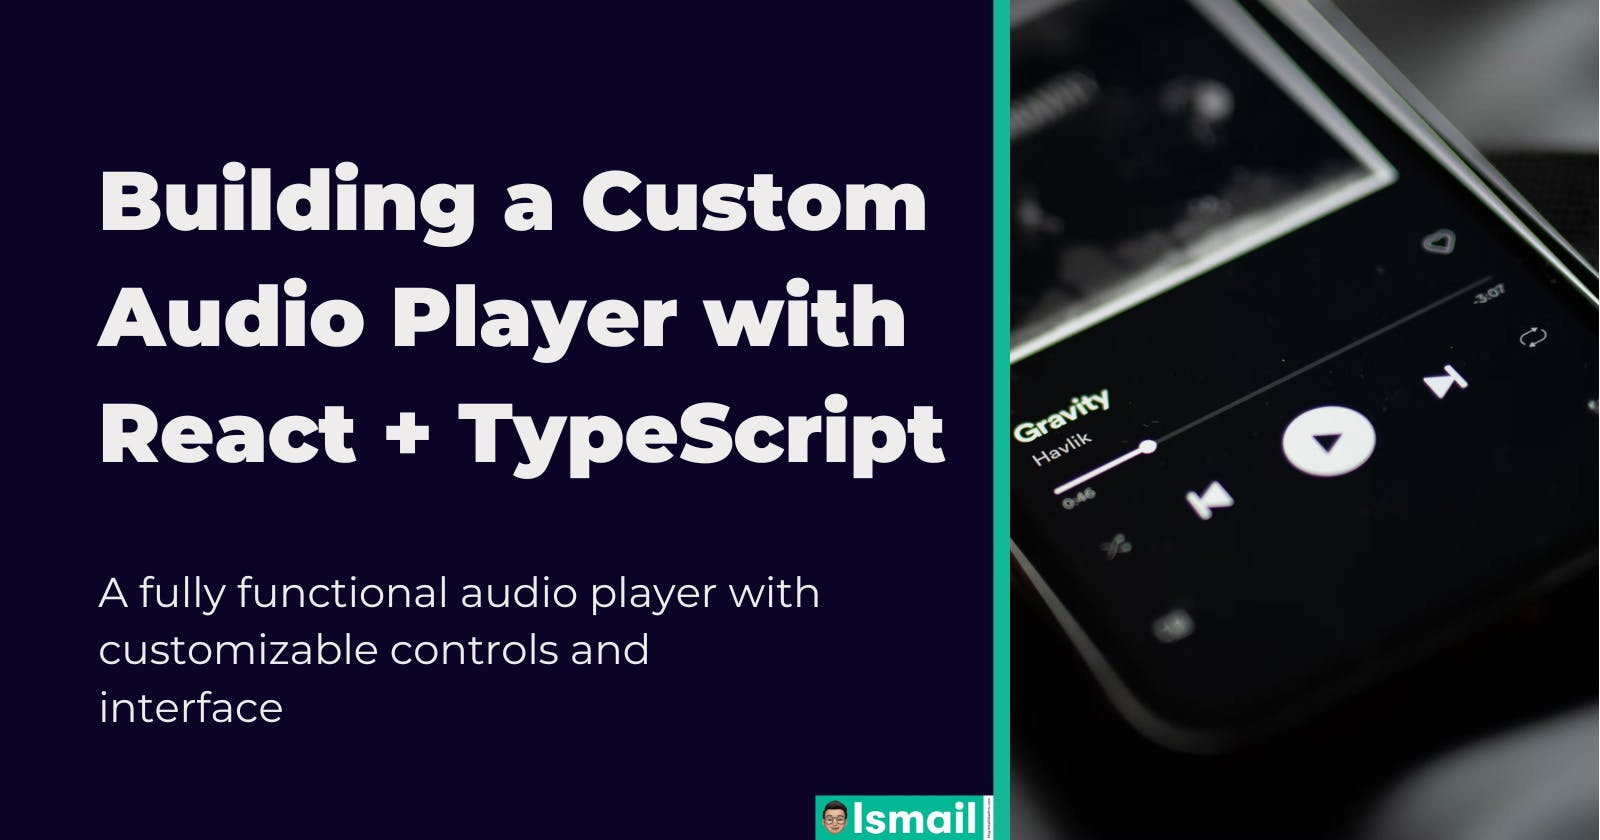 Building a Custom Audio Player with React + TypeScript - A Step-by-Step Tutorial